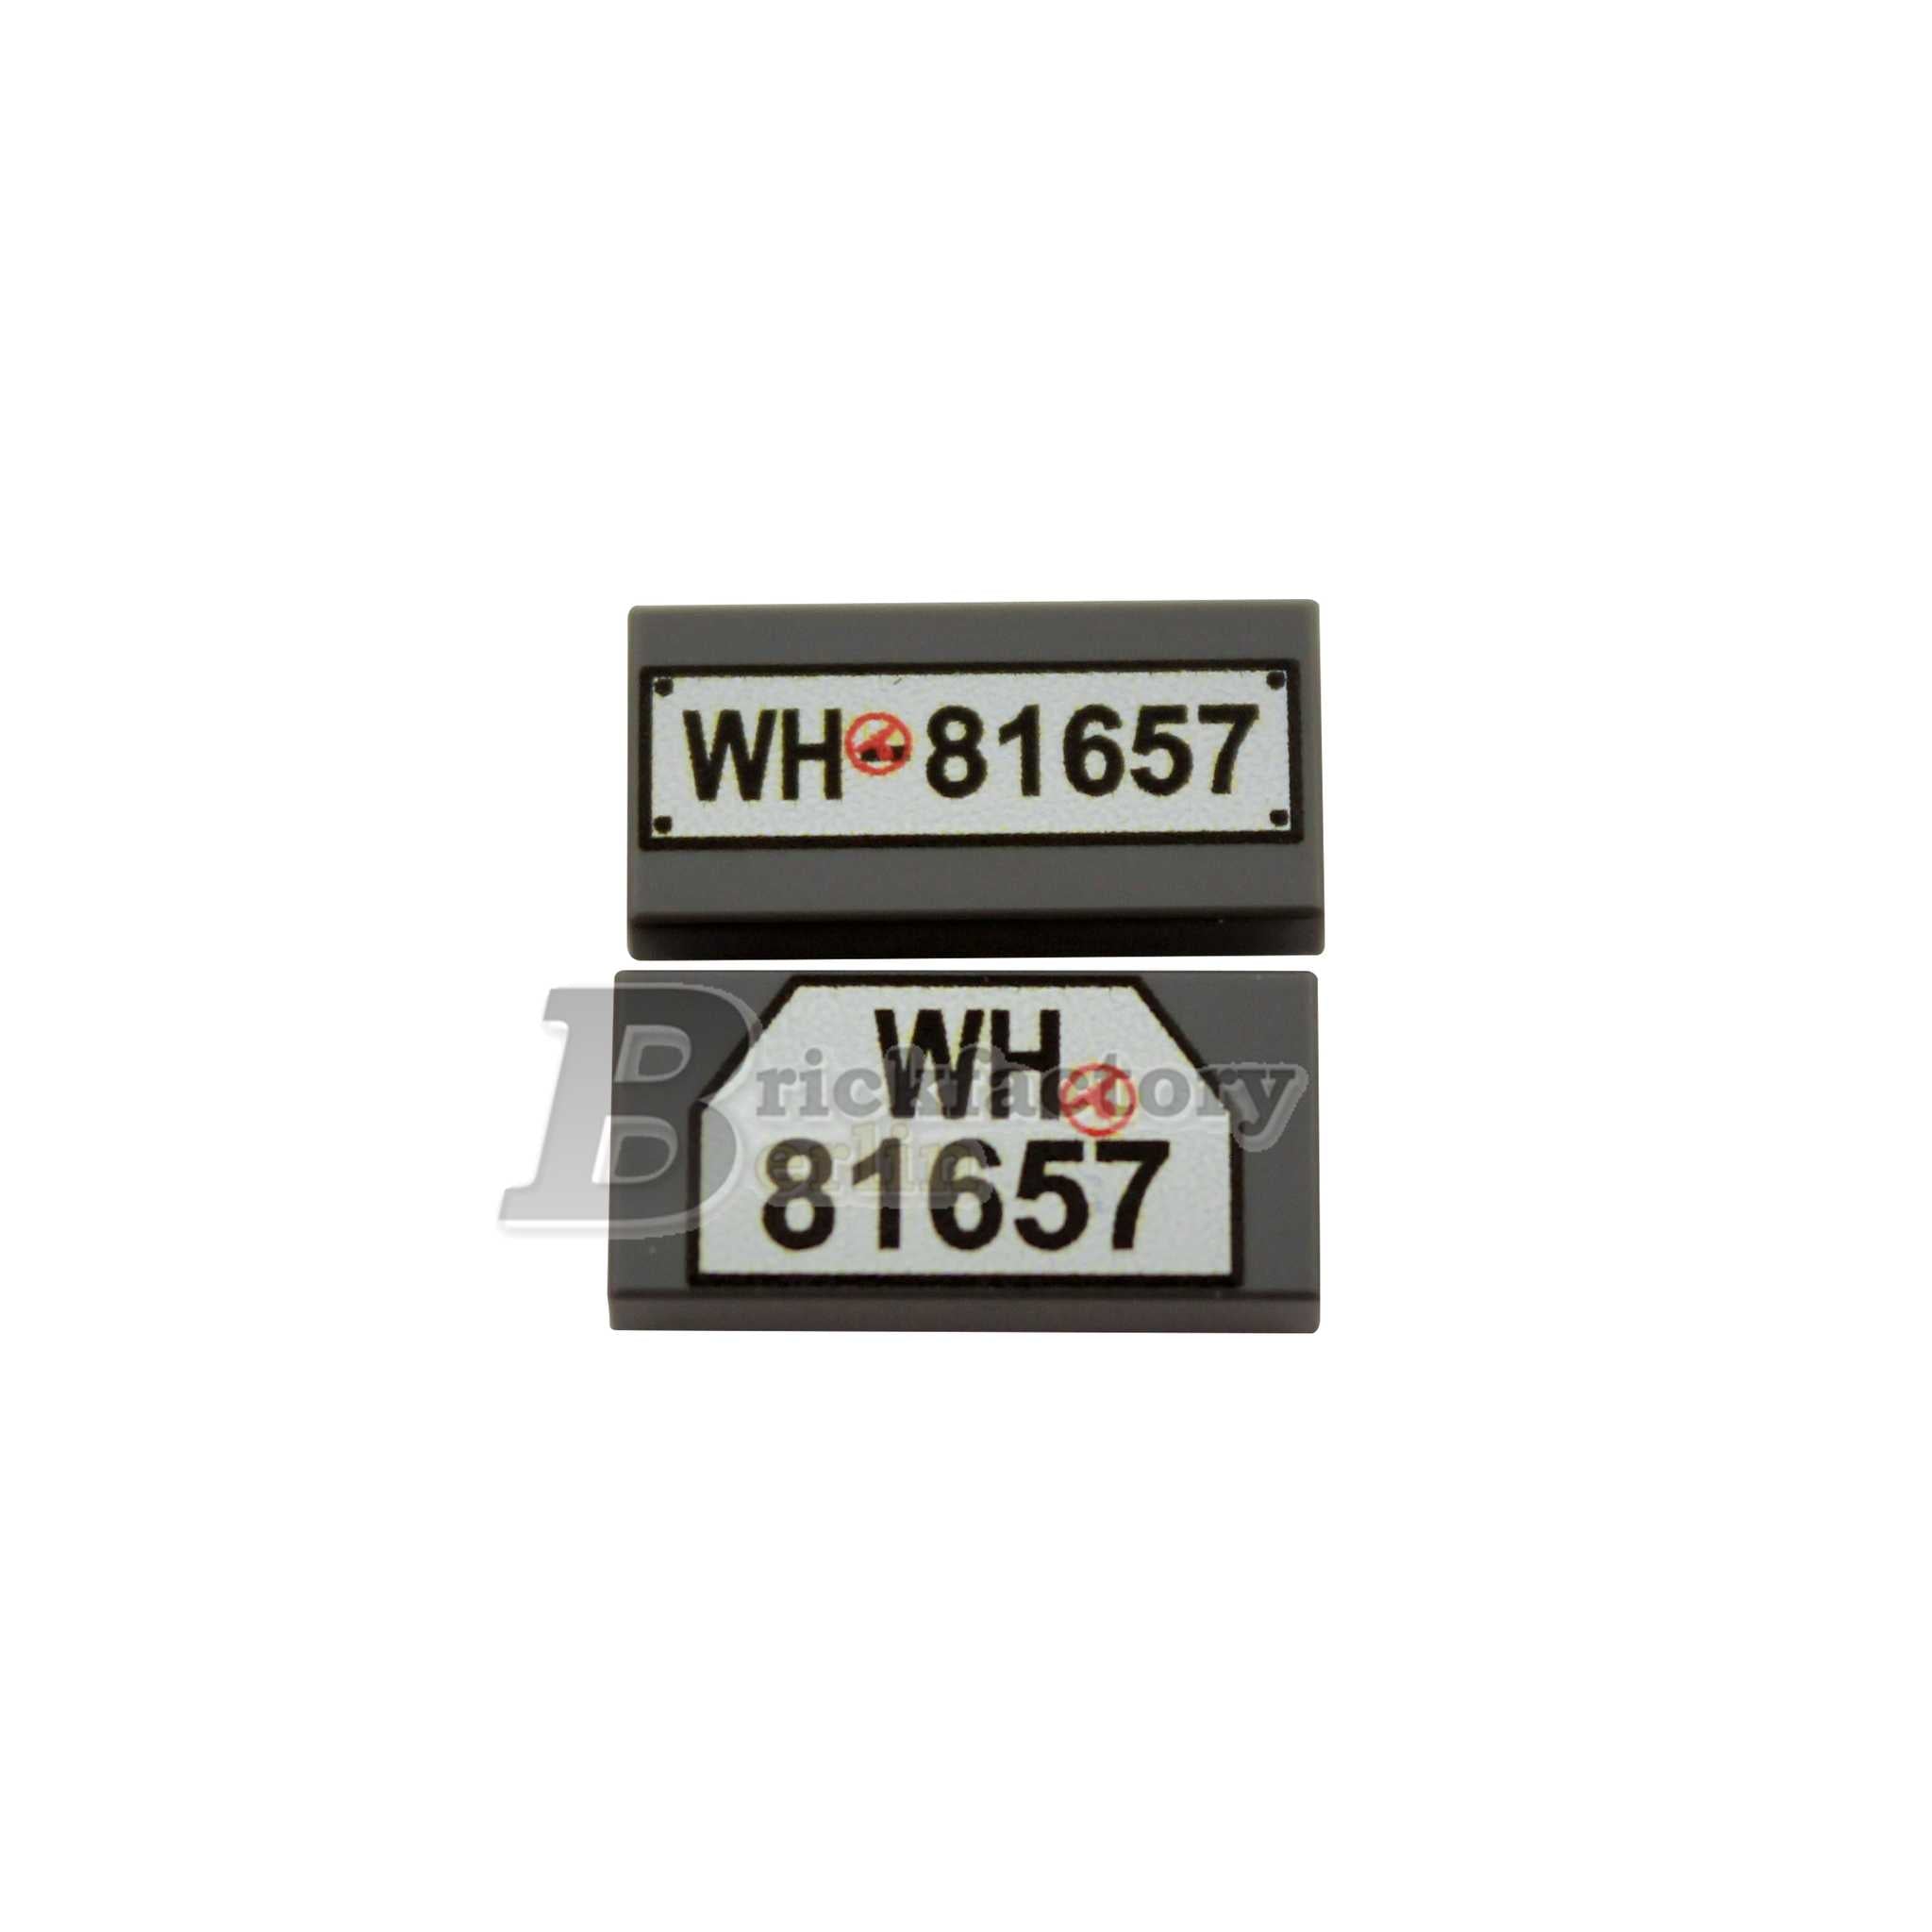 BF-0363B - License Plate Set-2 2-pack (Color: Dark Gray) Printed LEGO® tiles 1x2